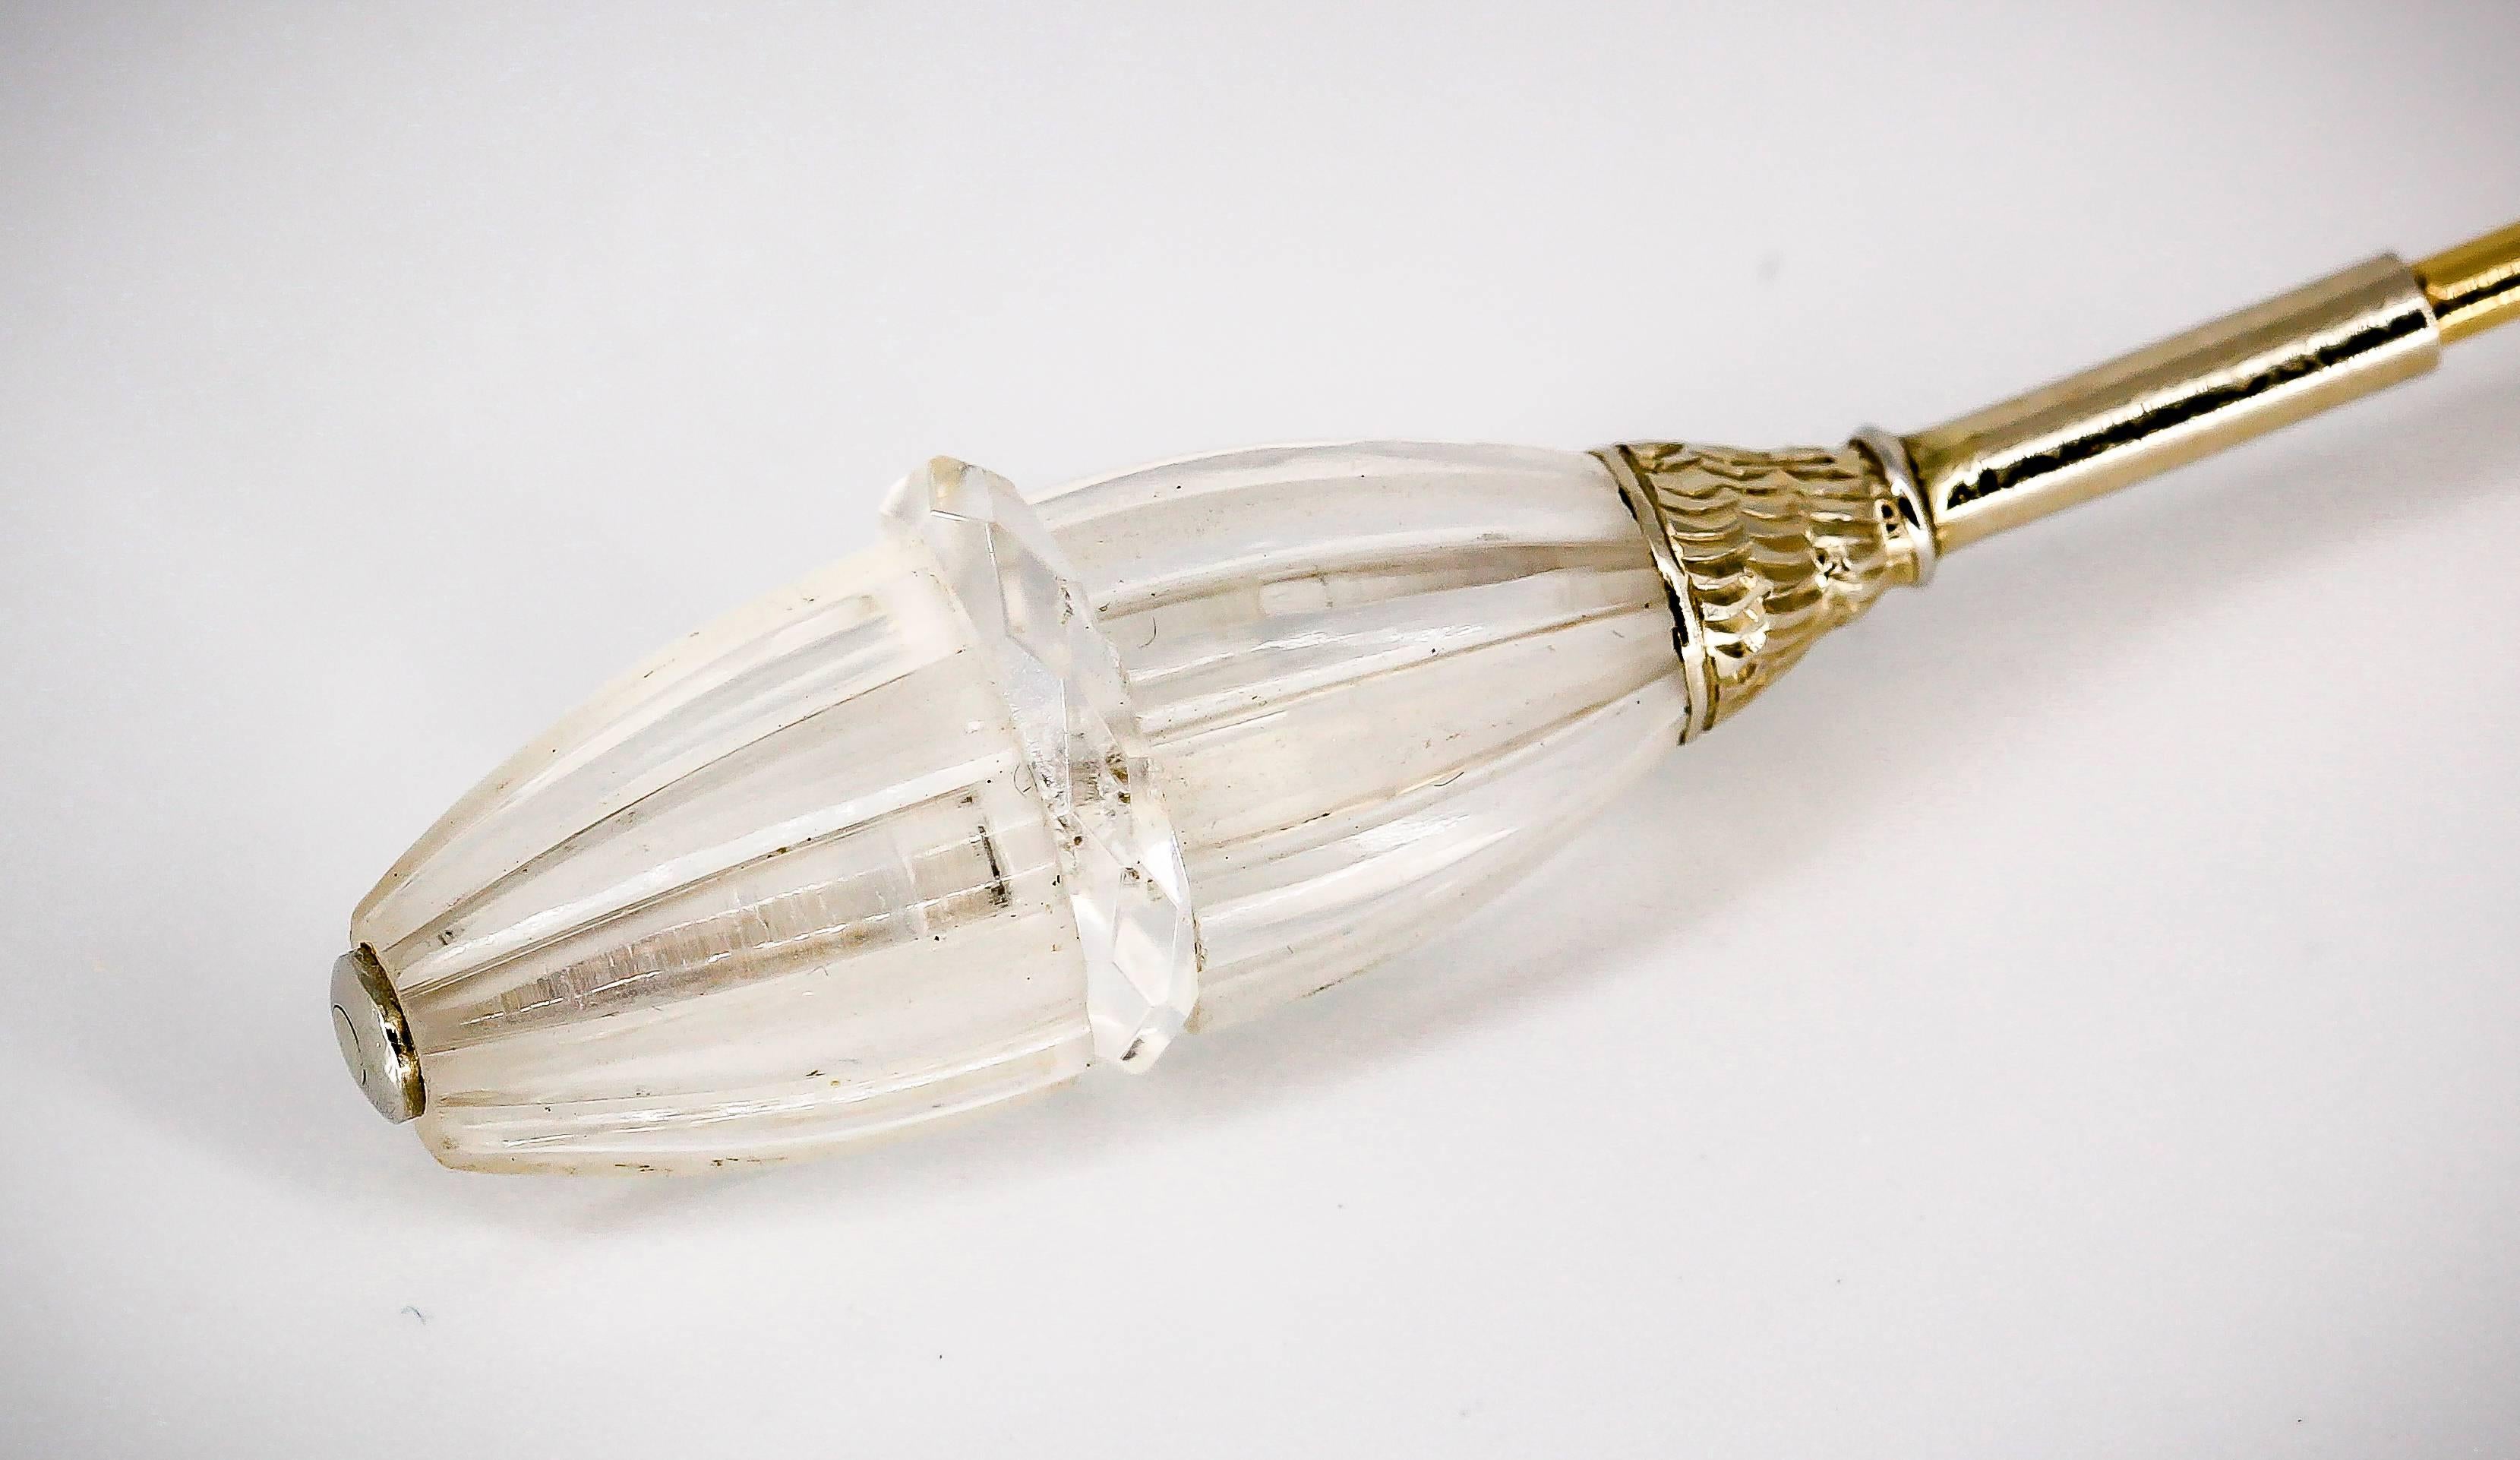 Rare and unusual rock crystal and platinum and 14K gold jabot pin, circa 1920. Excellent workmanship and easy to wear. One side unscrews for ease of installation. One side has a chip on rock crystal as seen in picture no. 5.

